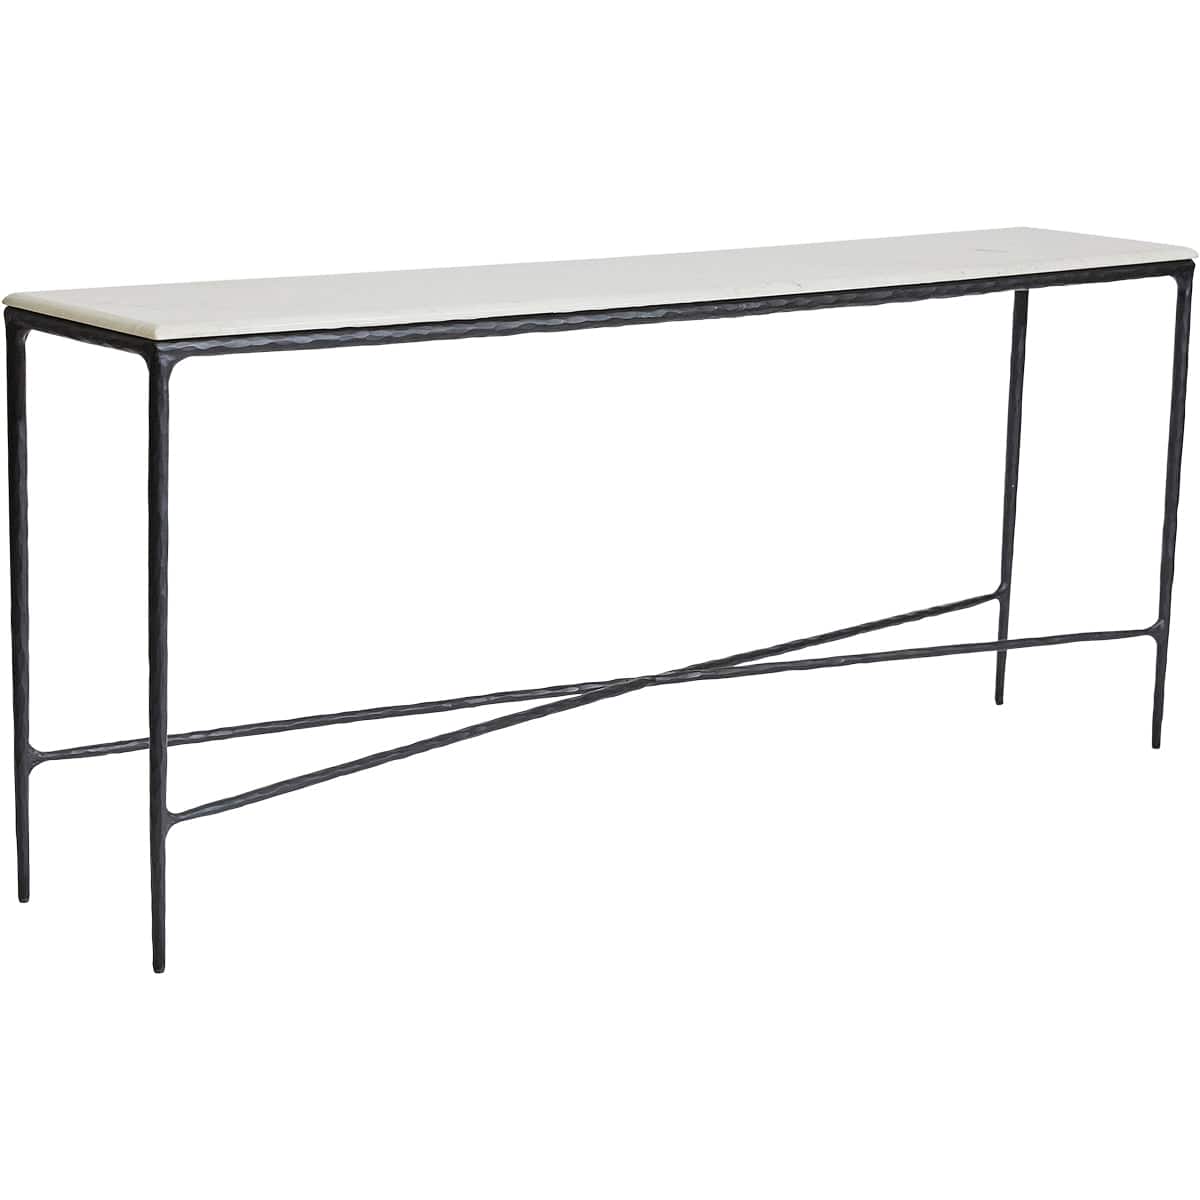 Cafe Lighting & Living Heston Marble Console Table - Large Black